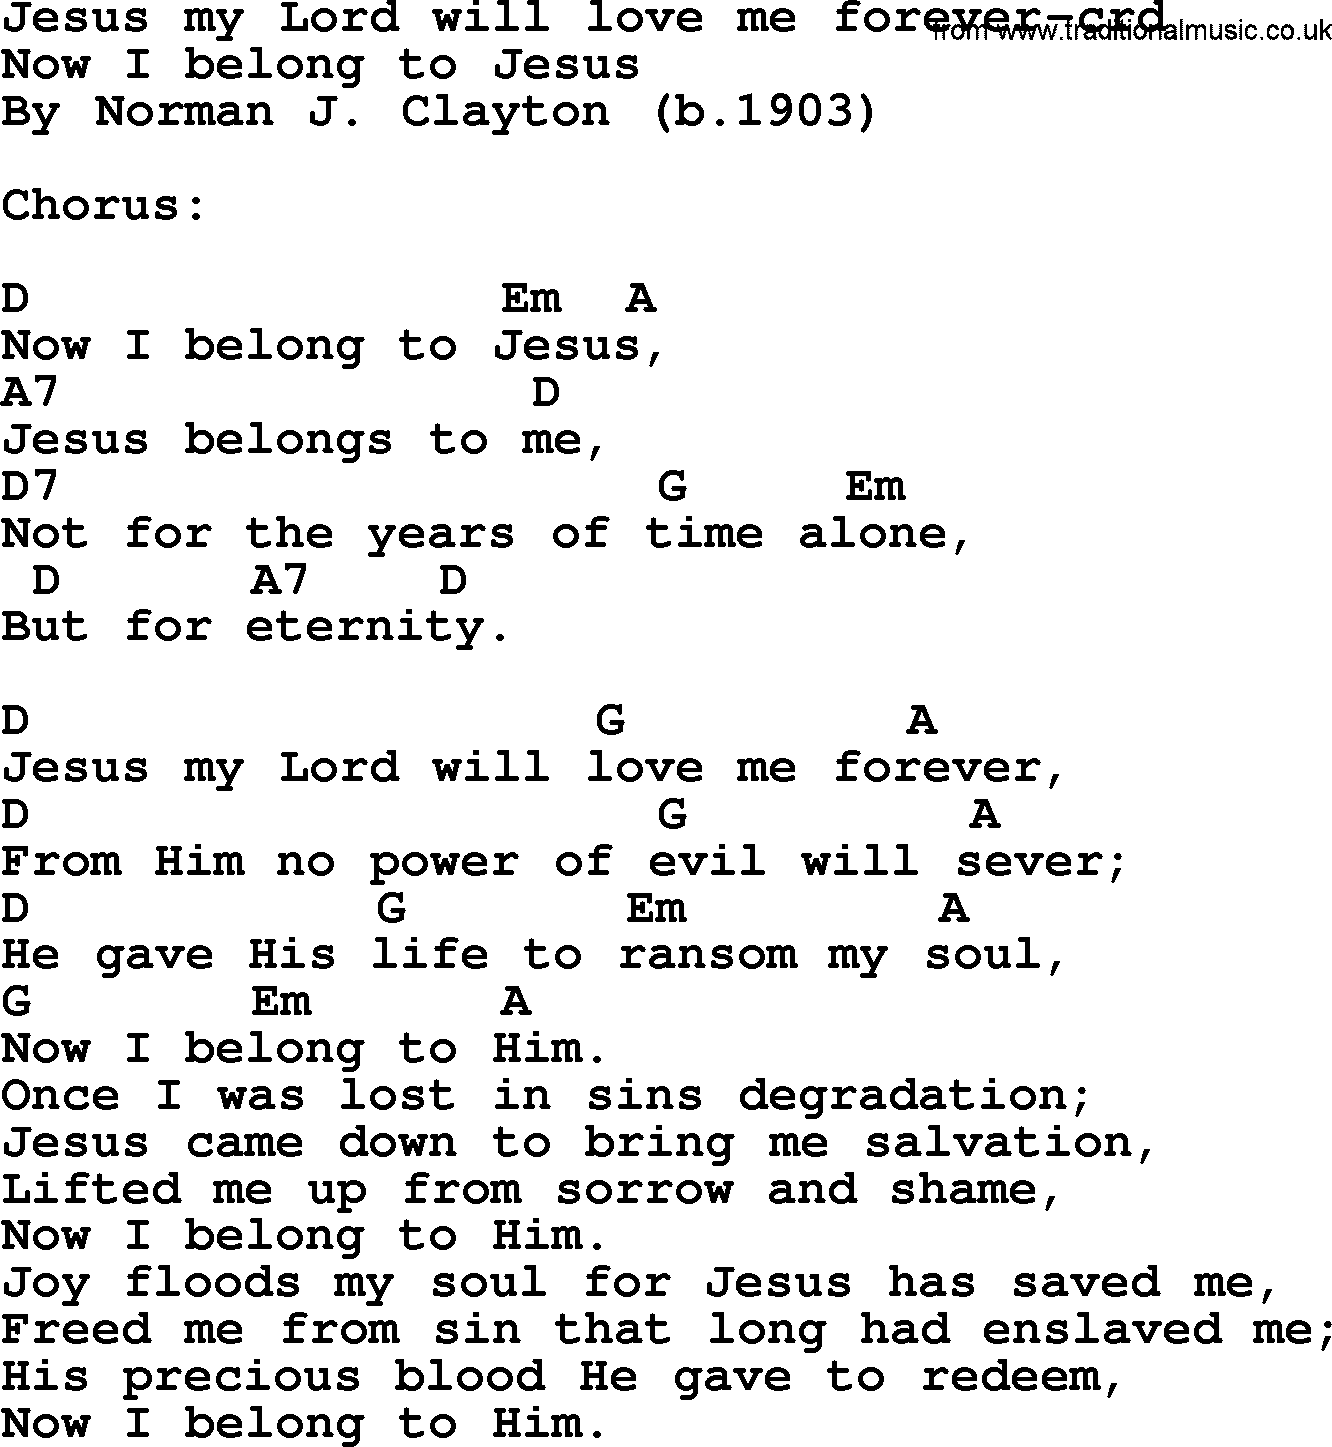 Top 500 Hymn: Jesus My Lord Will Love Me Forever, lyrics and chords